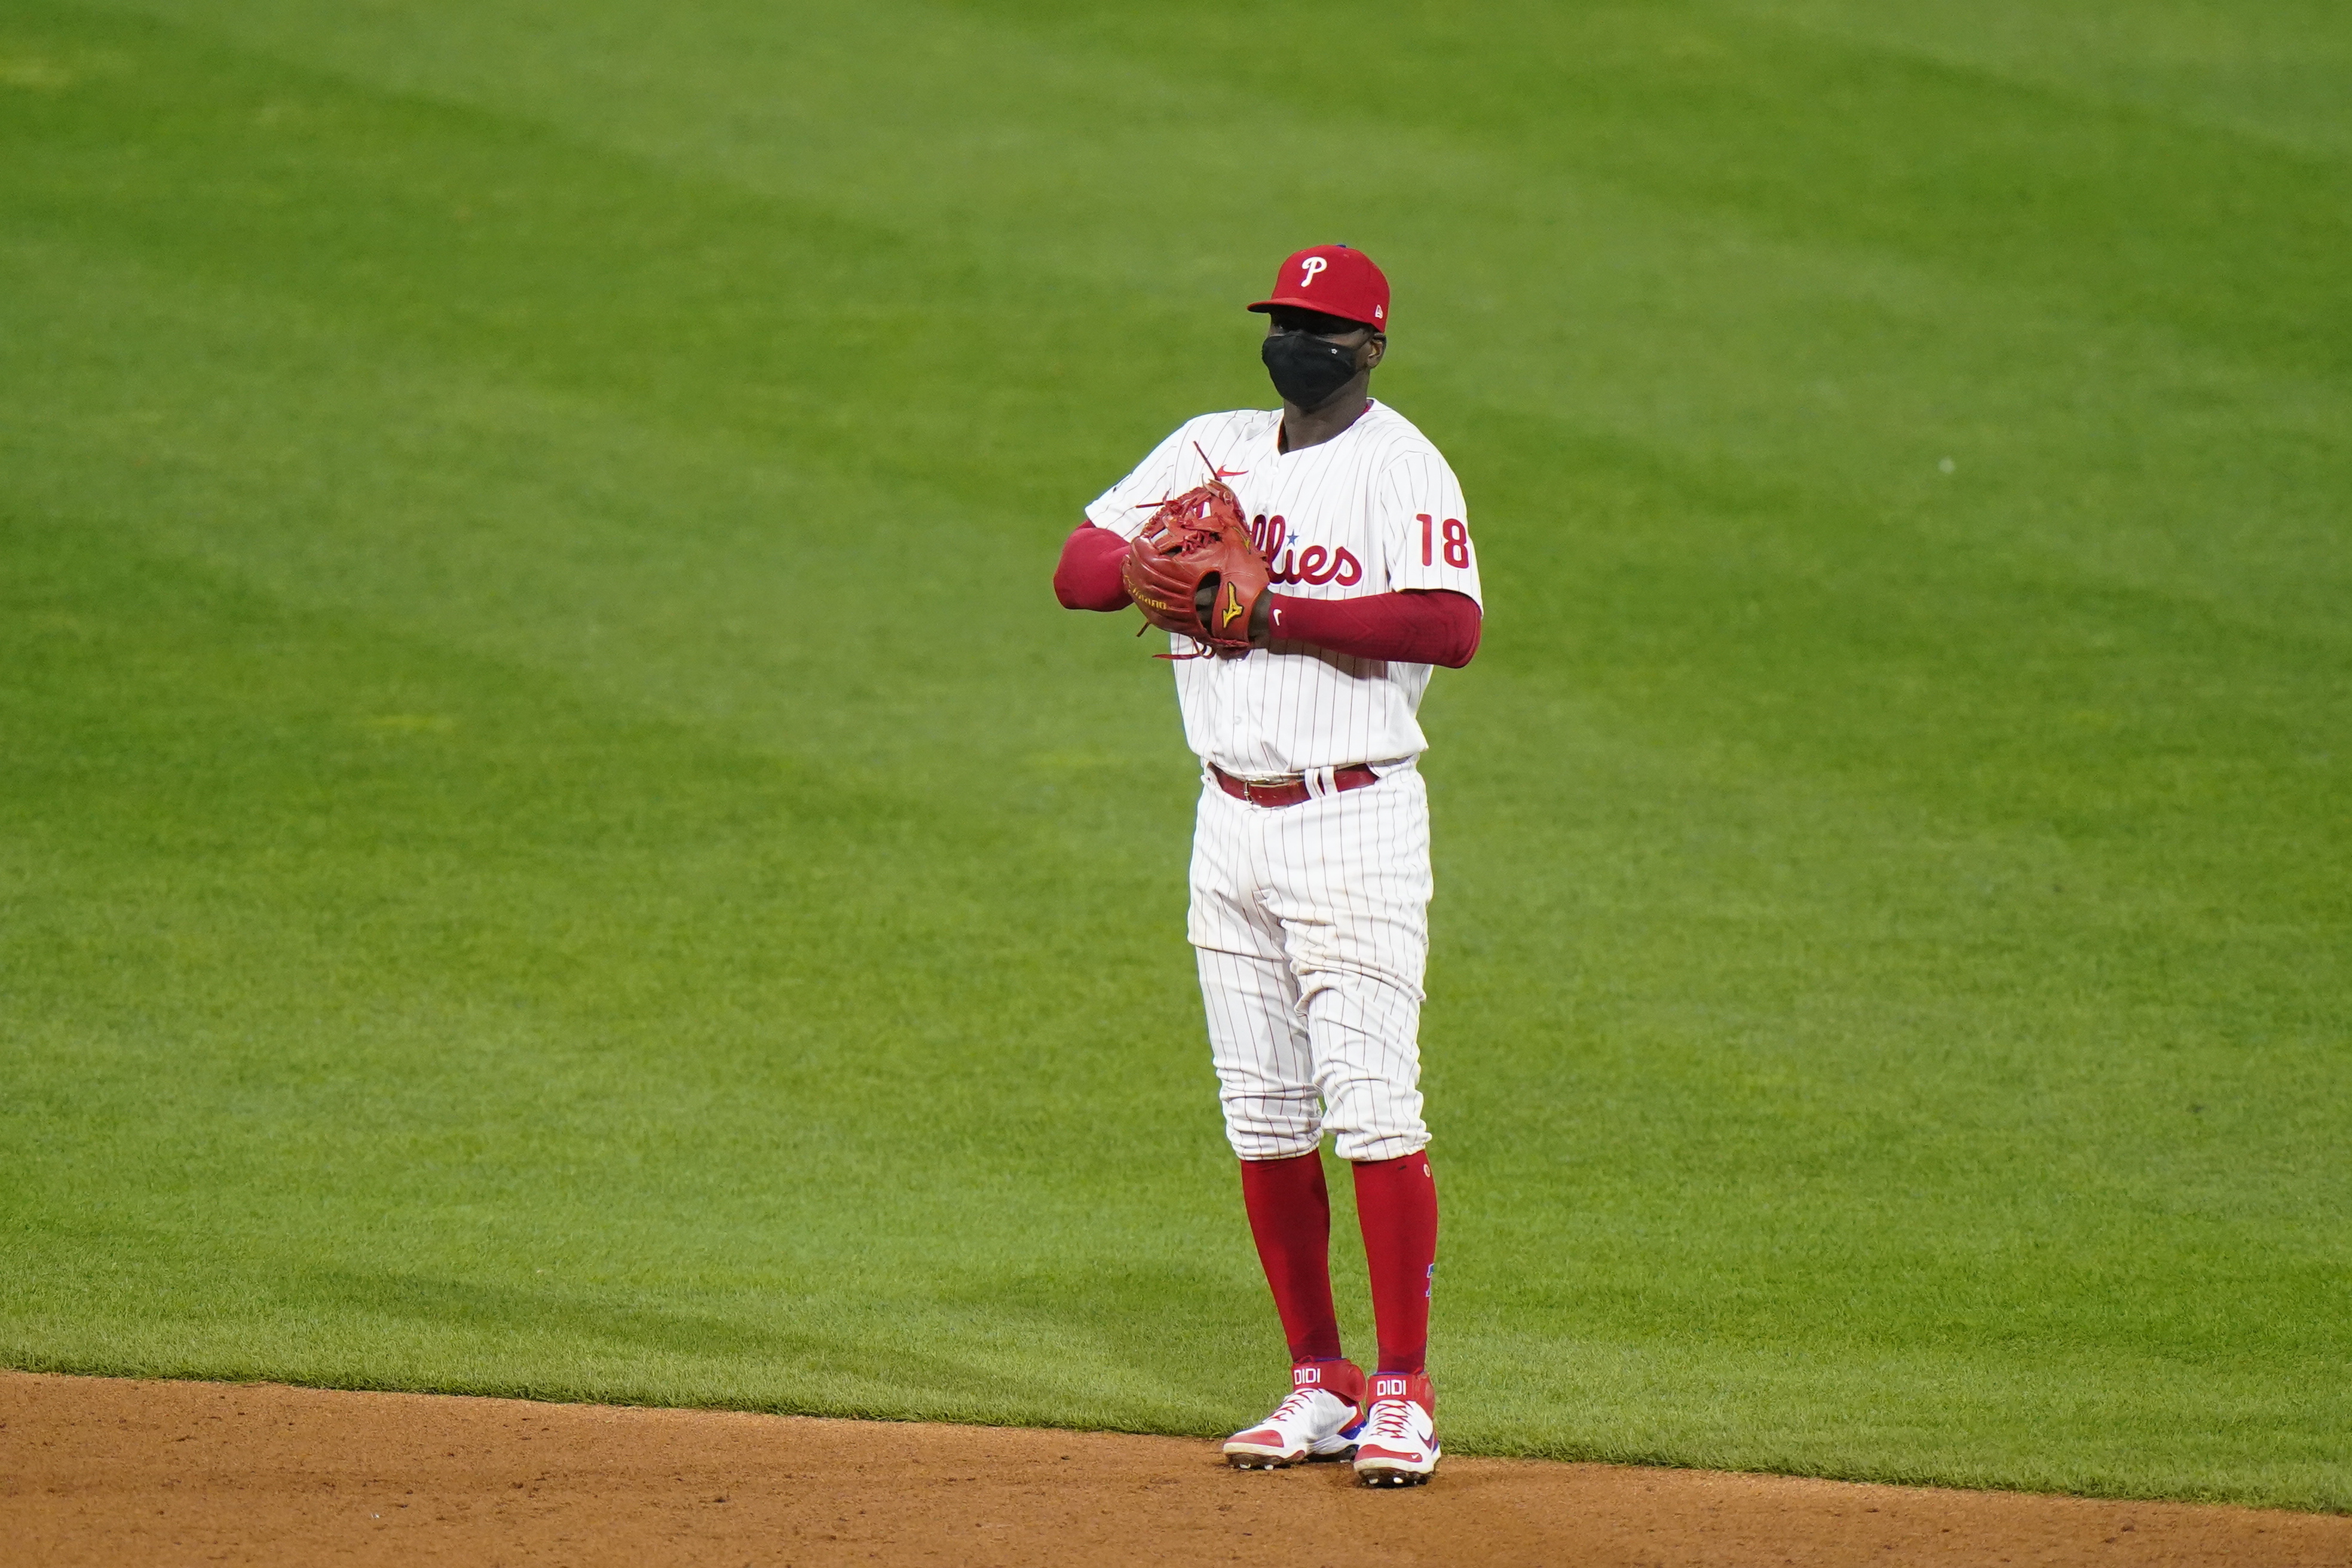 Shortstop competition? Didi Gregorius says he was told by Phillies